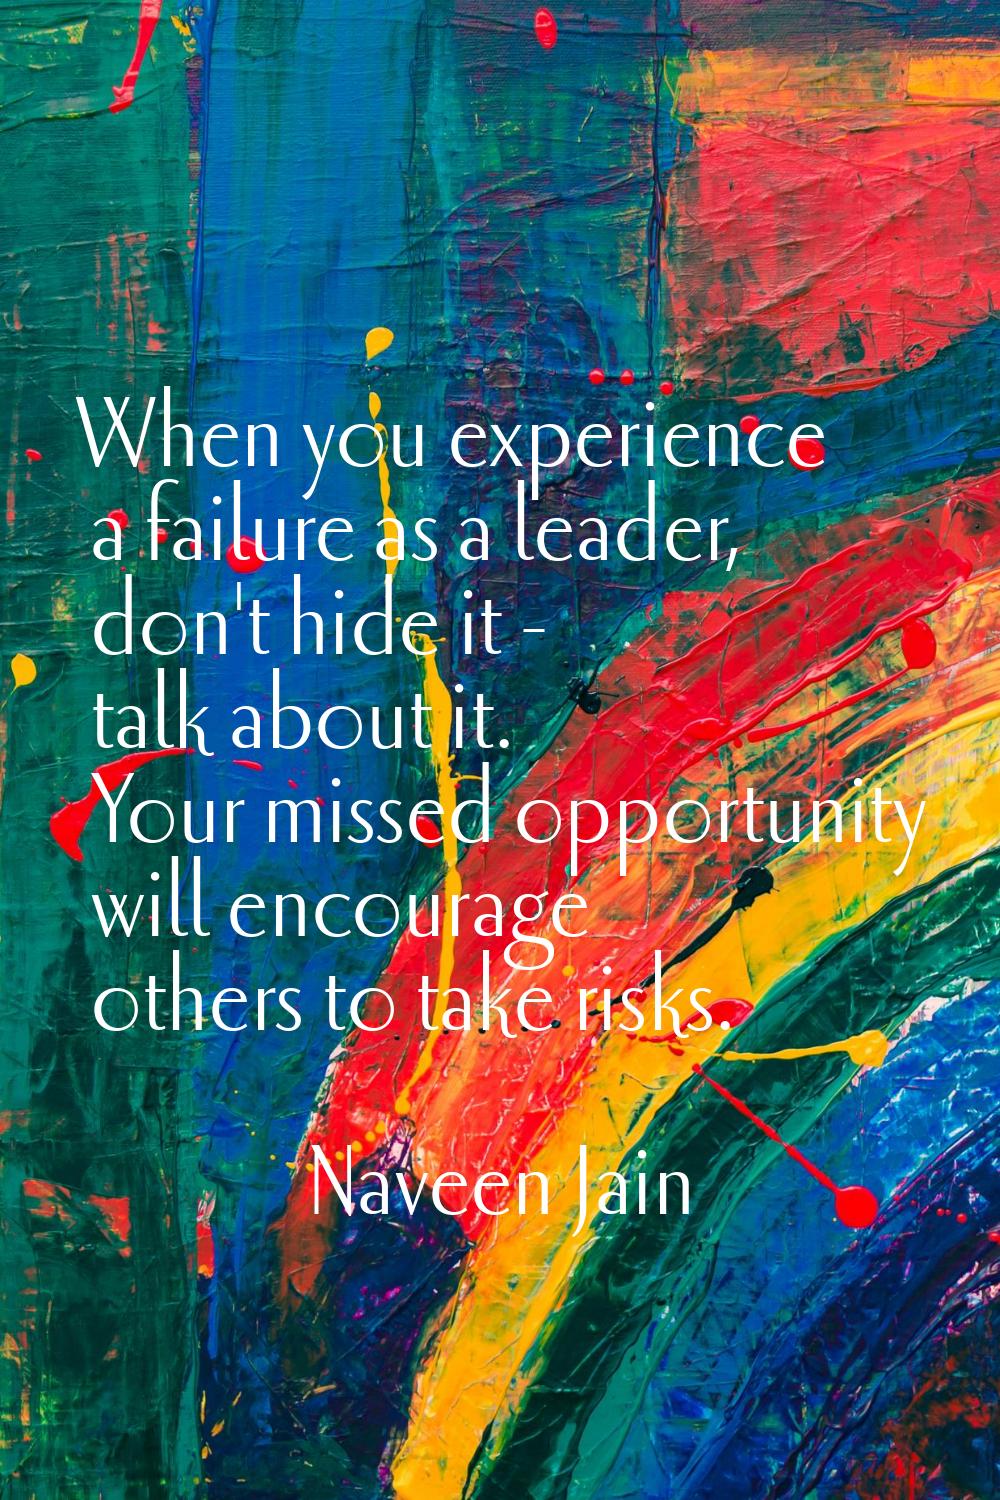 When you experience a failure as a leader, don't hide it - talk about it. Your missed opportunity w